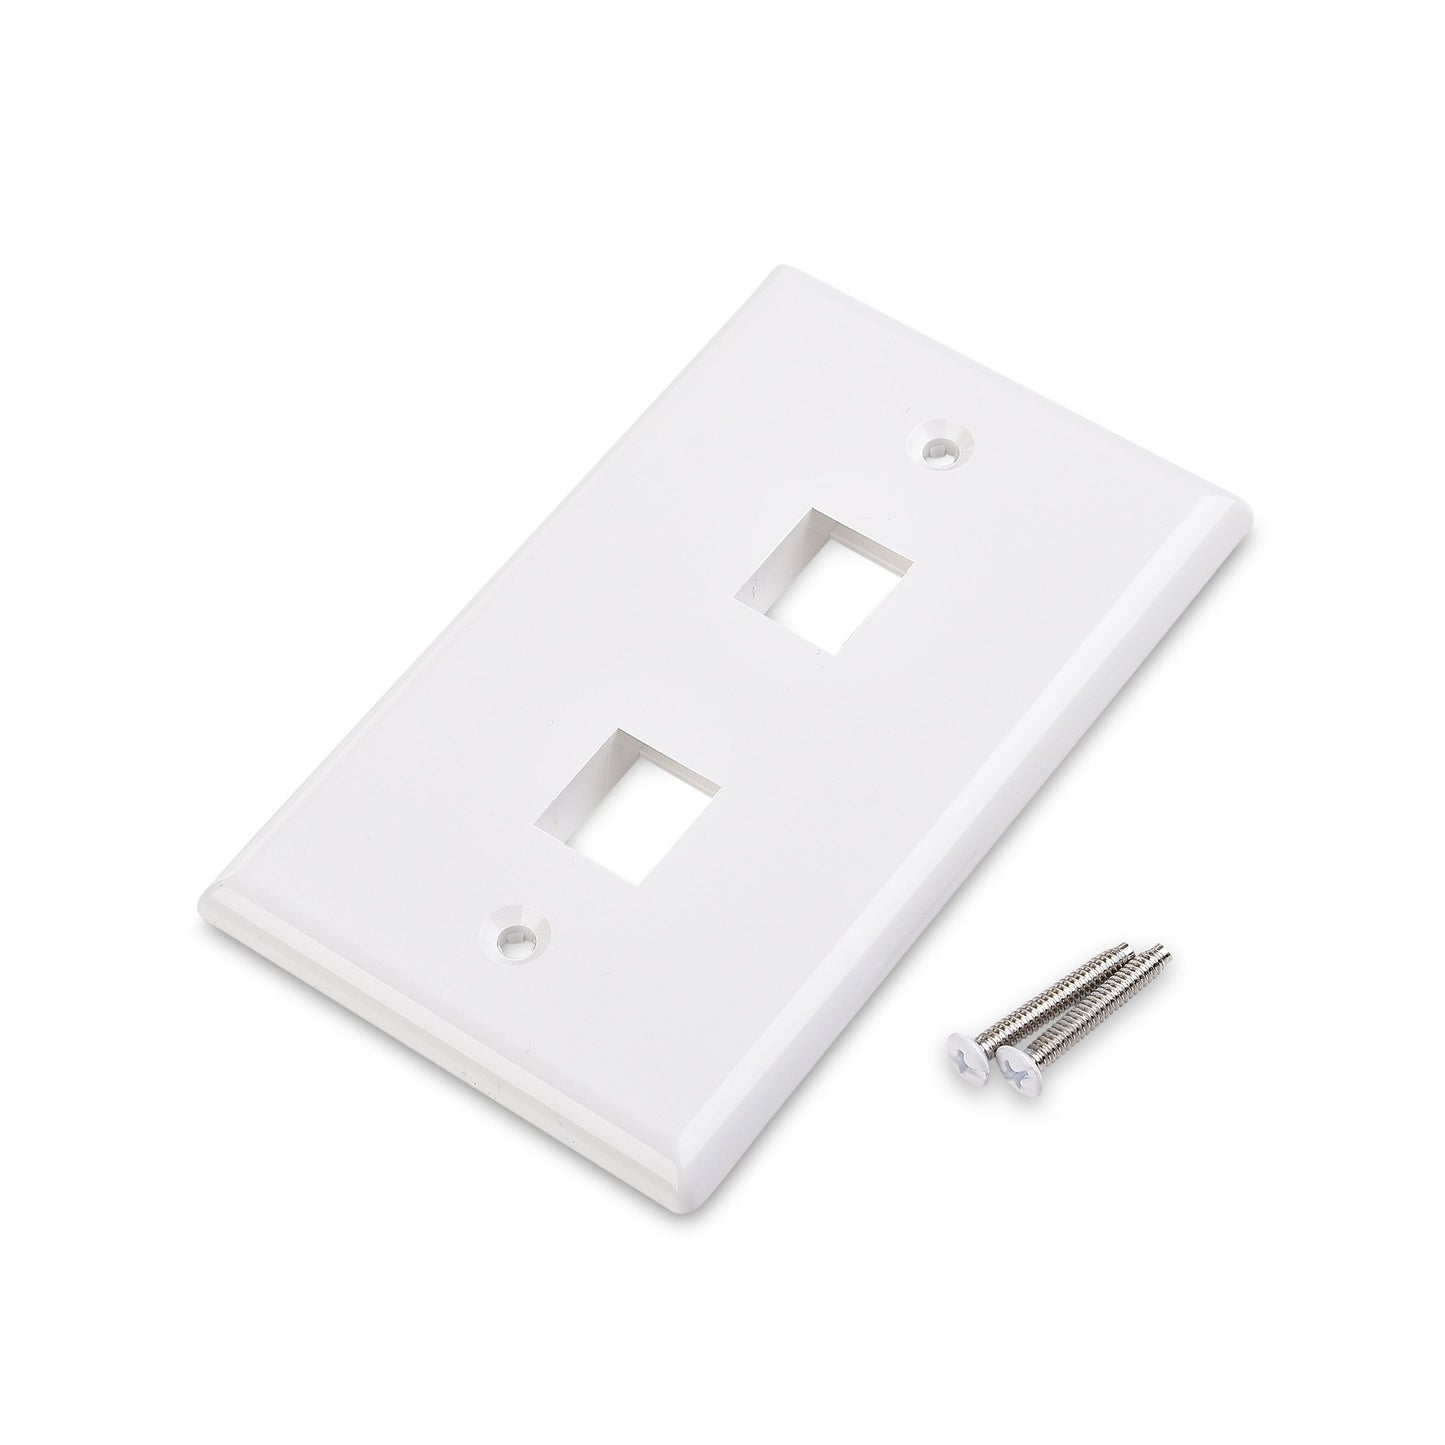 Cable Matters 10-Pack Low Profile 3-Port Cat5e, Cat6 Keystone Jack Wall Plate in White